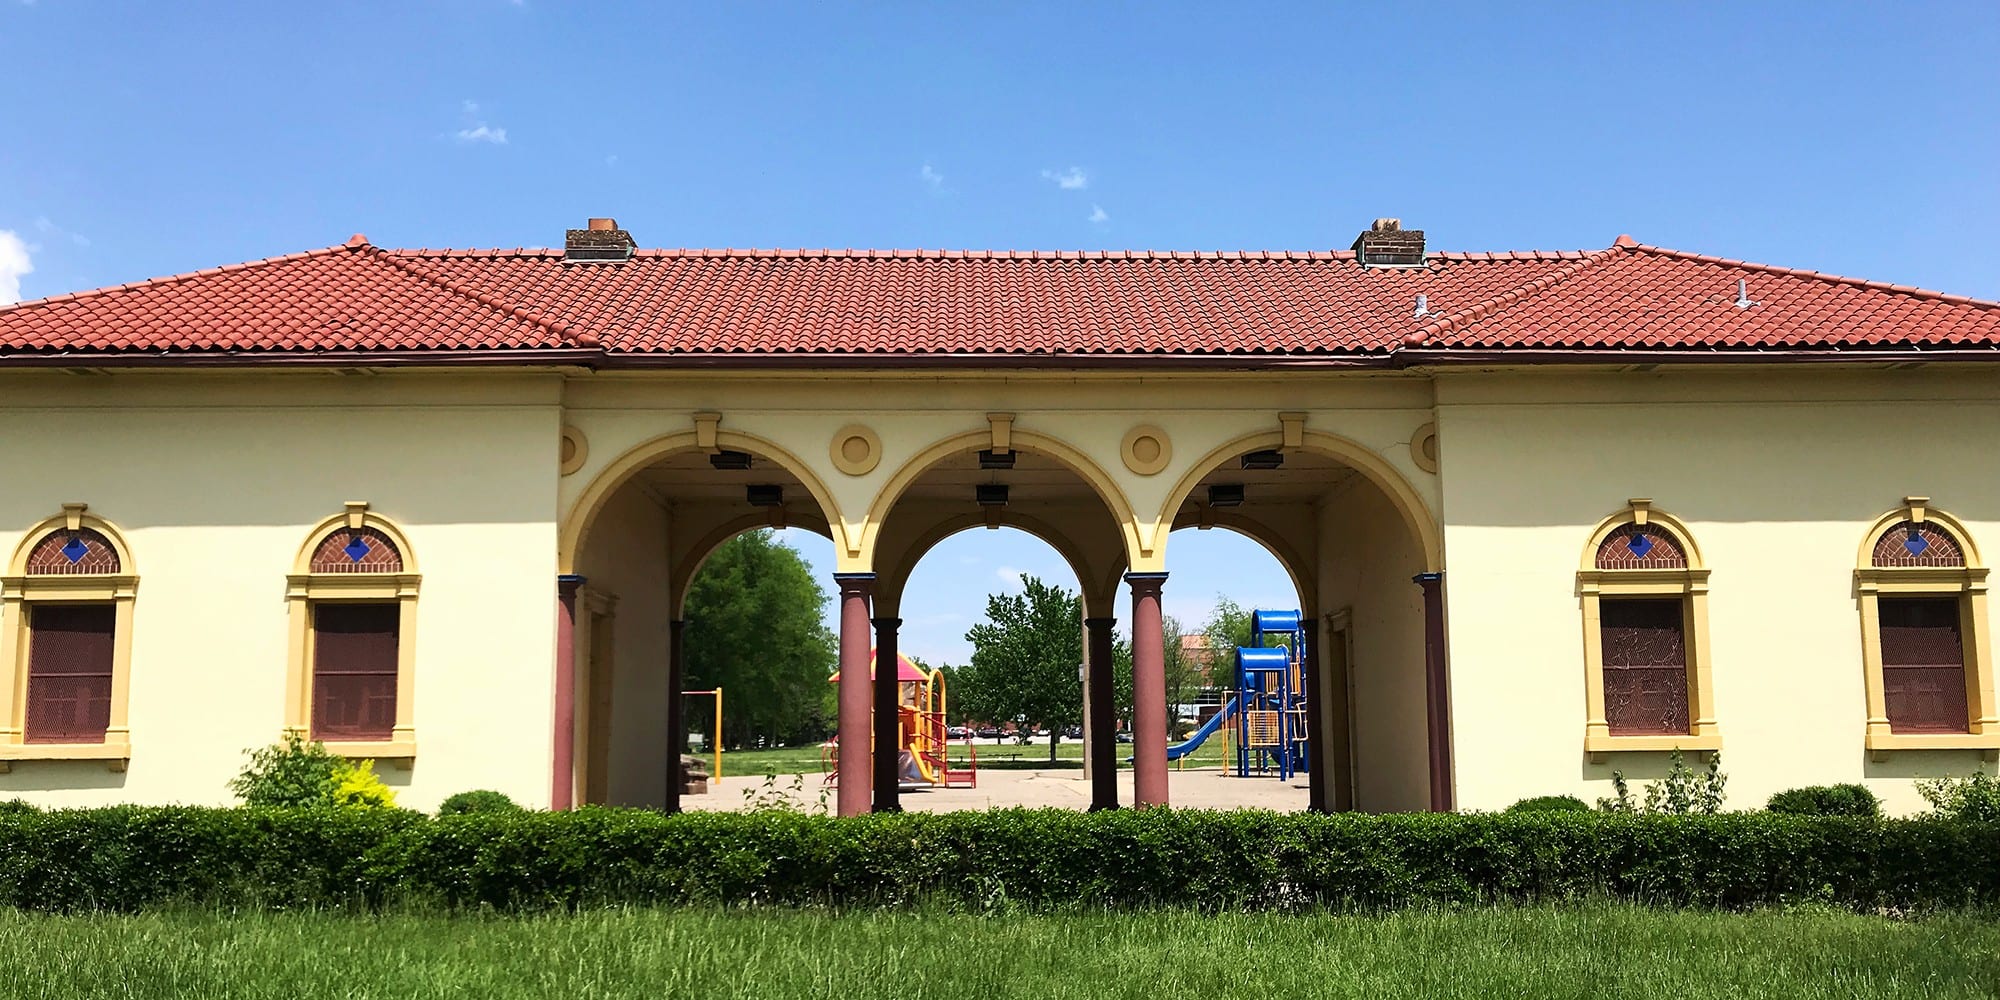 The pavilion at Minnie Wood Memorial Square in Dutchtown, St. Louis. Photo by Nick Findley.